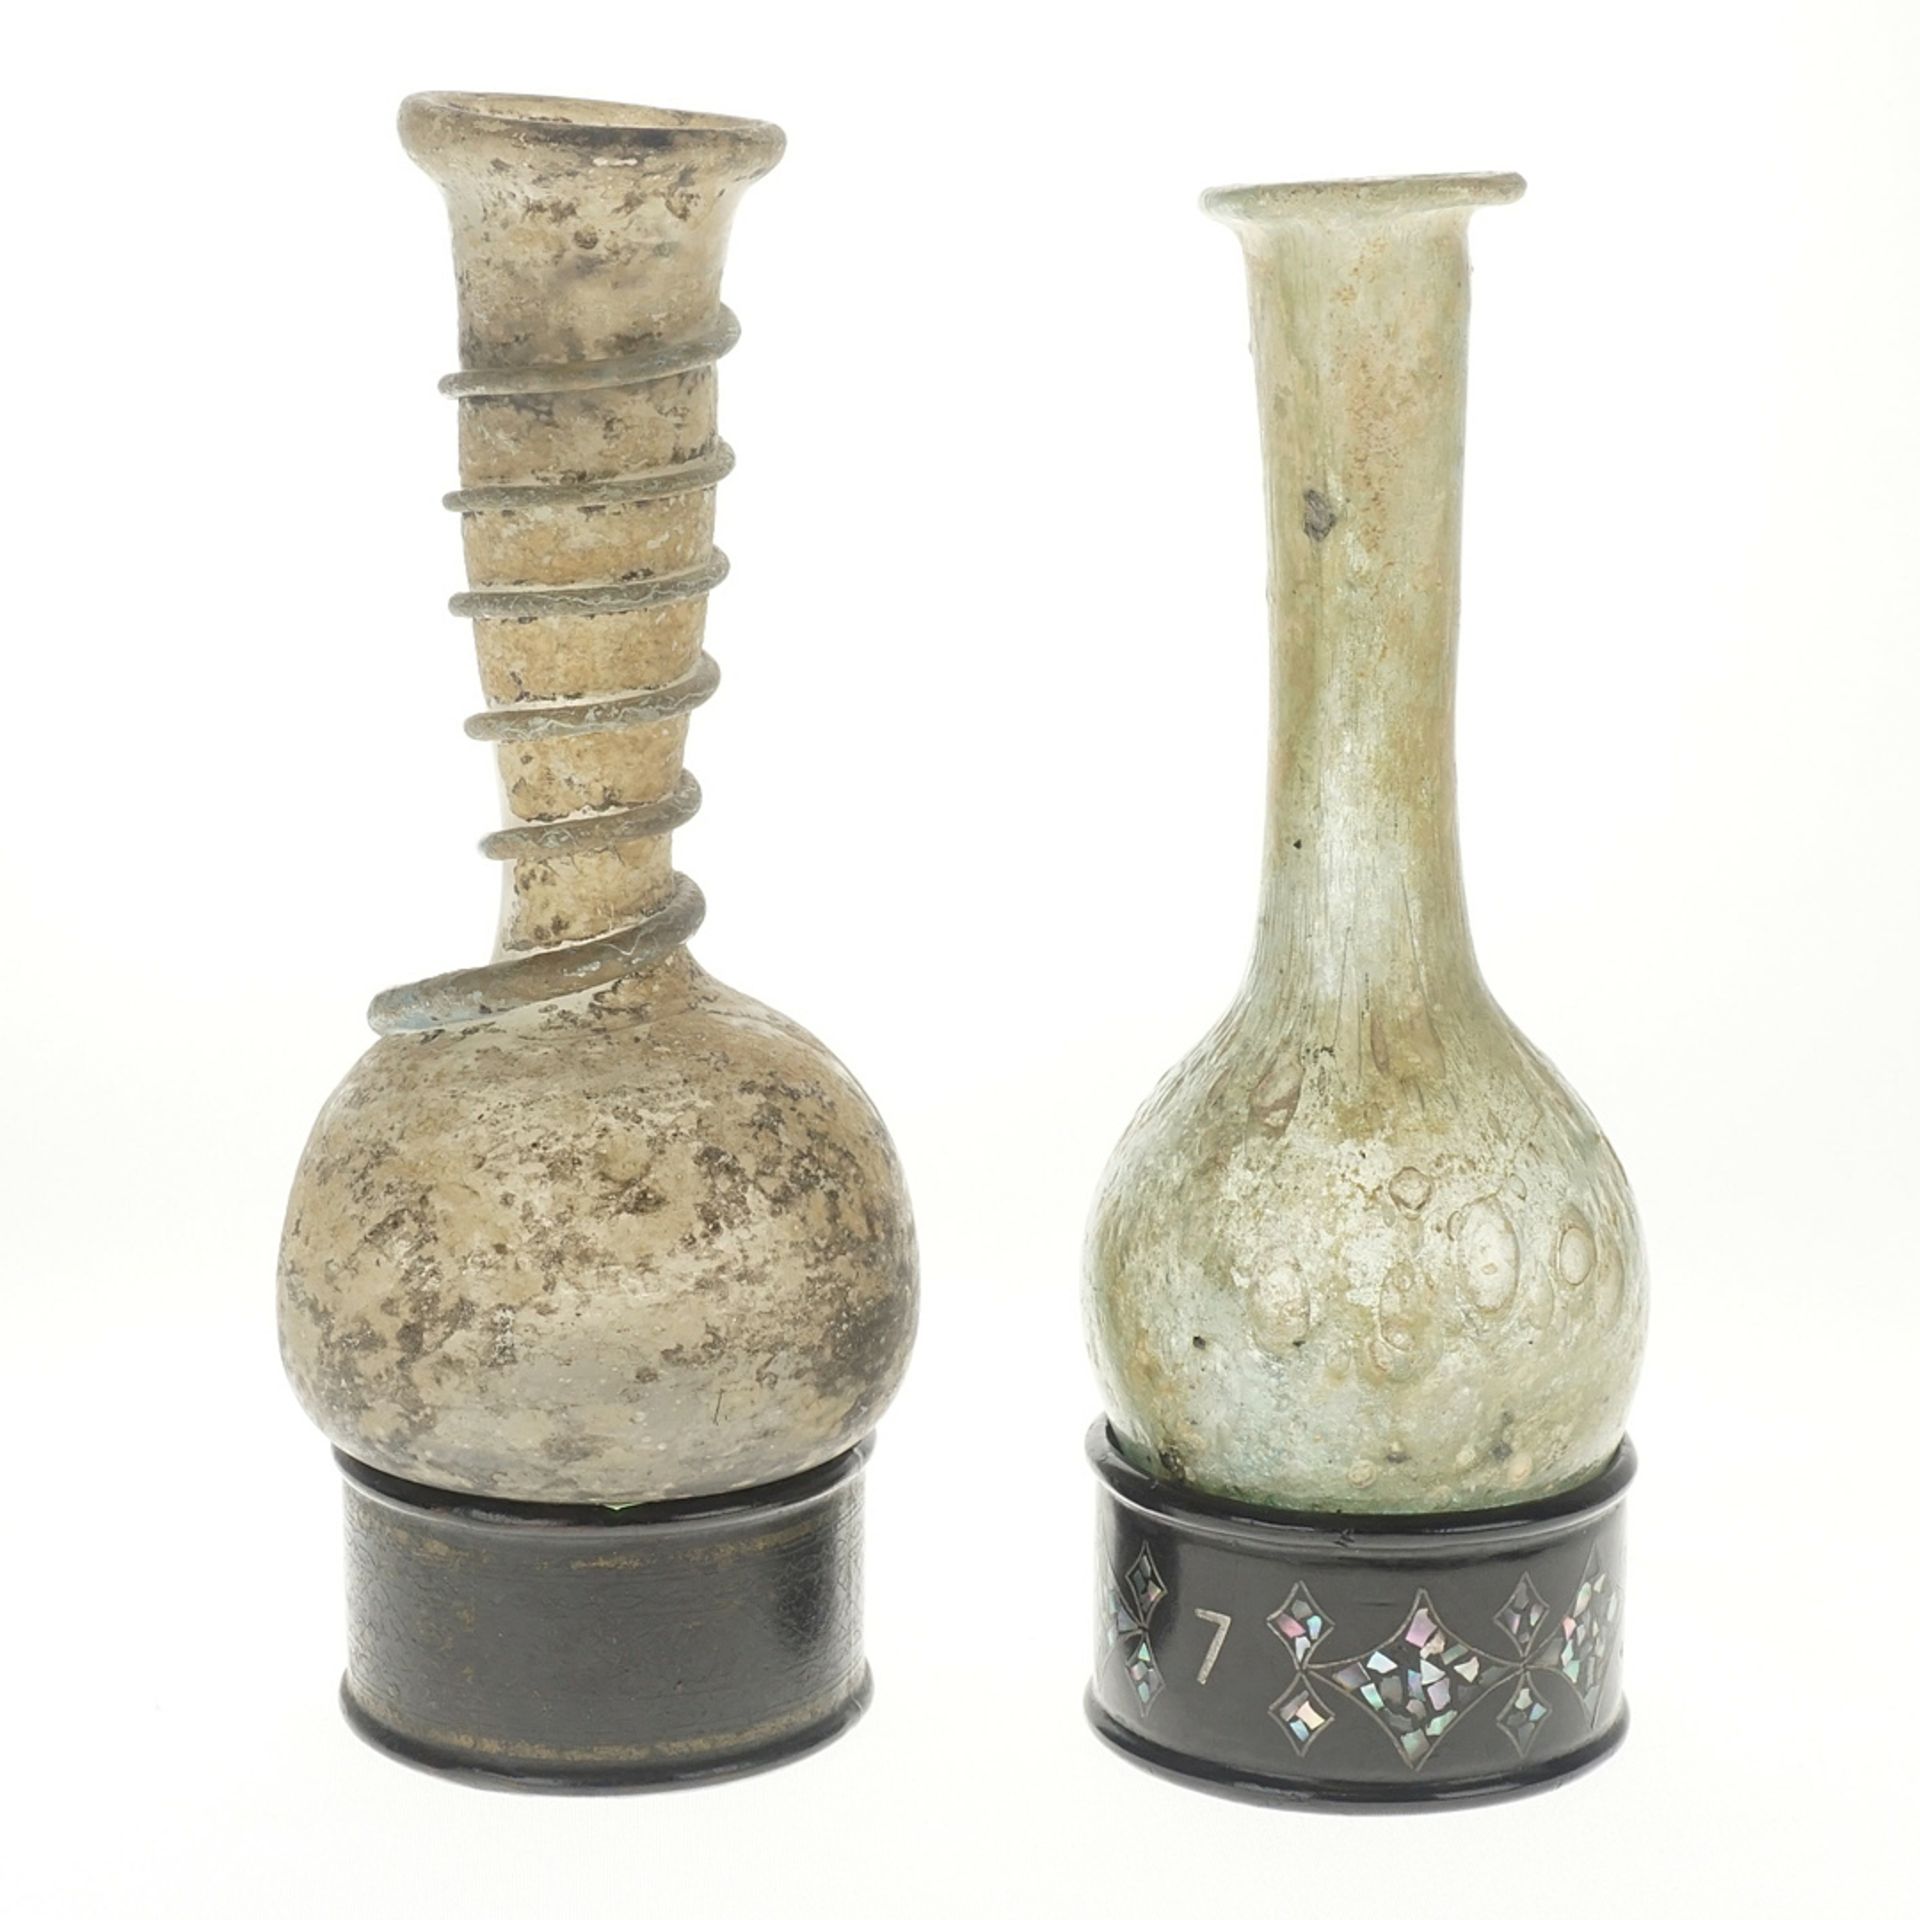 Two small glass bottles based on models from Roman antiquity - Image 2 of 3